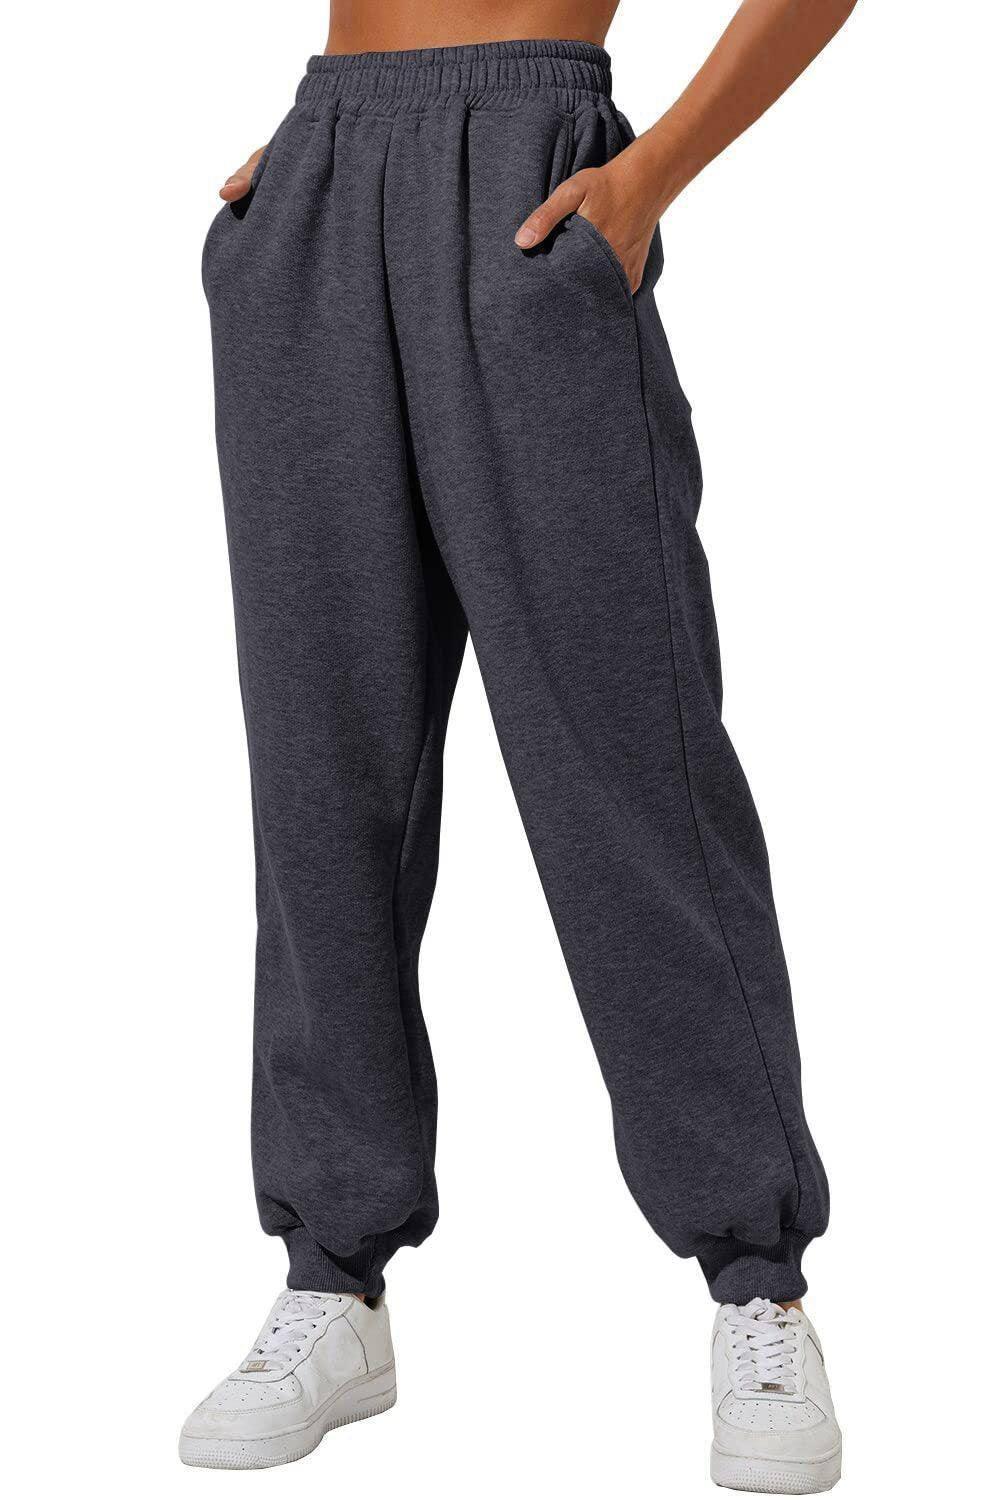 Women's Trousers With Pockets High Waist Loose Jogging-Dark Grey-10